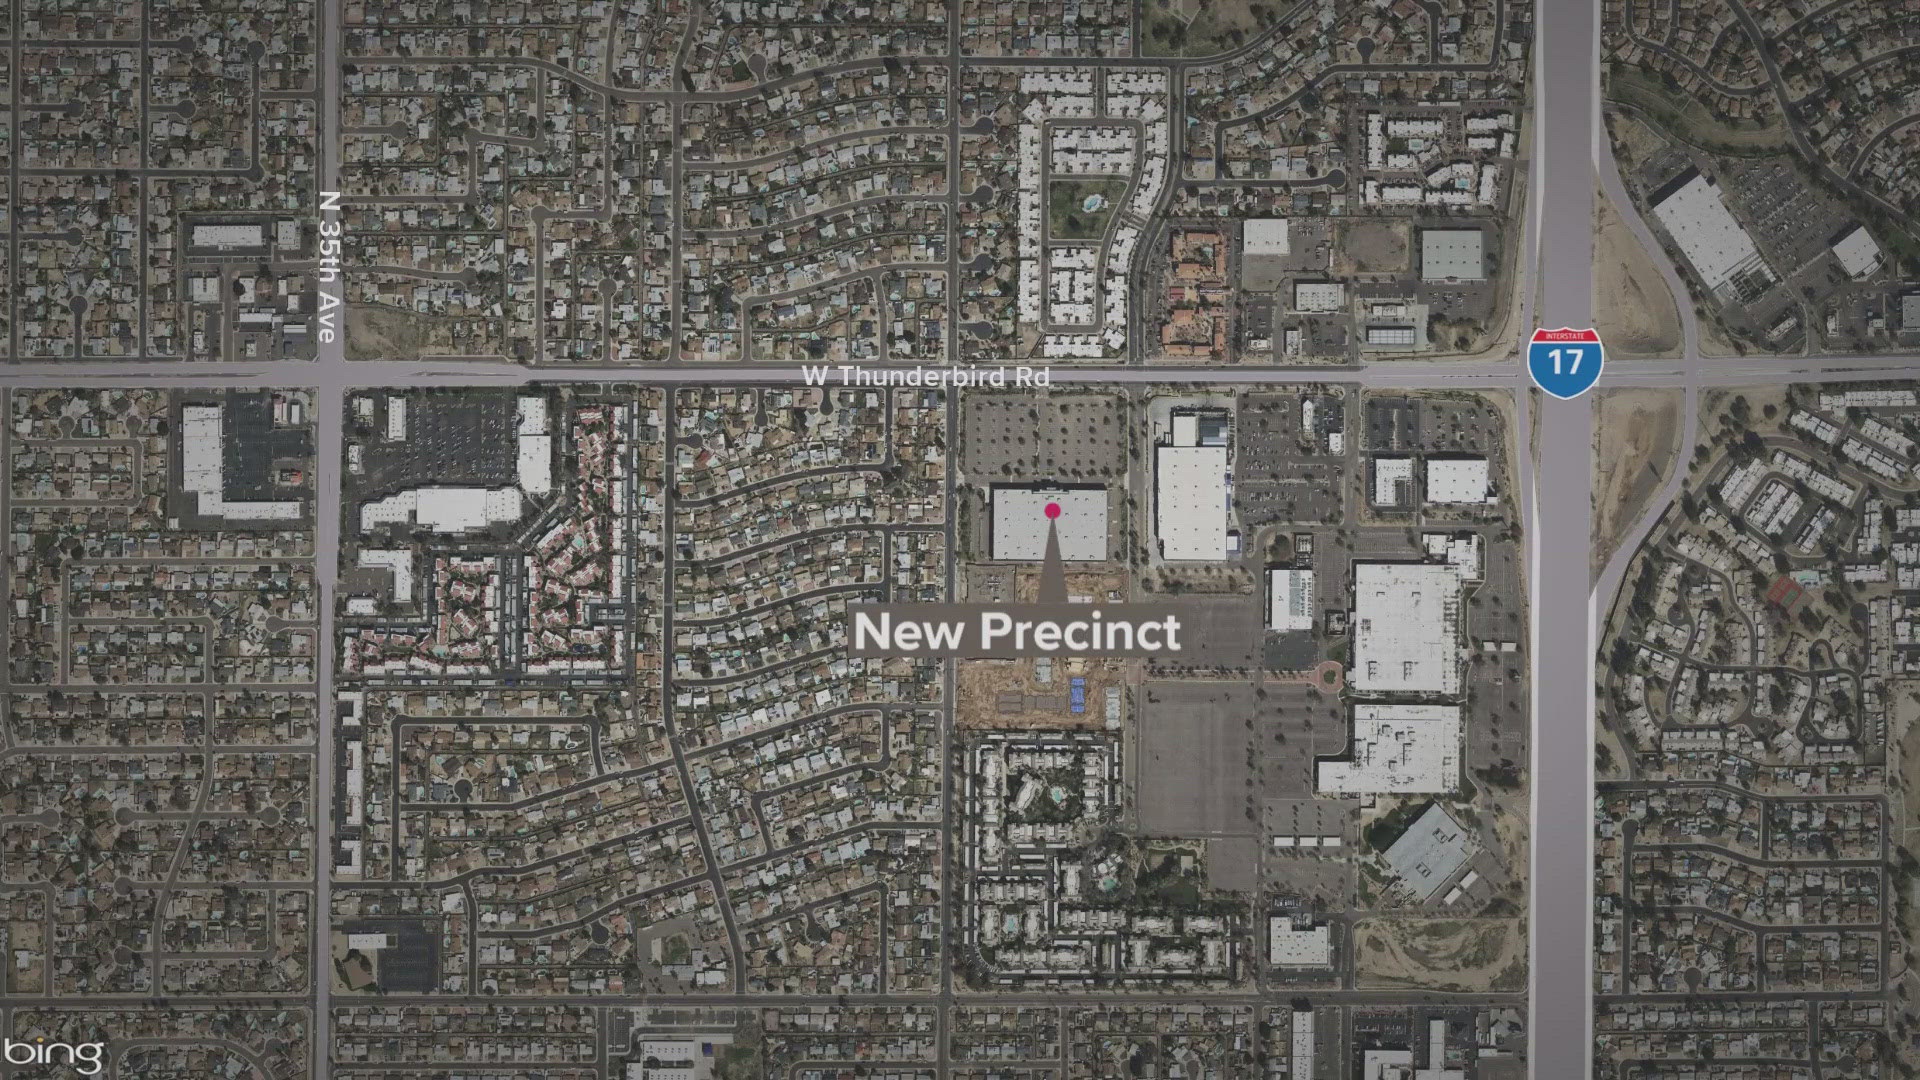 The former Fry's Electronics store at I-17 and Thunderbird Road will take on a new life as a police precinct as the City of Phoenix approved a plan to buy the land.